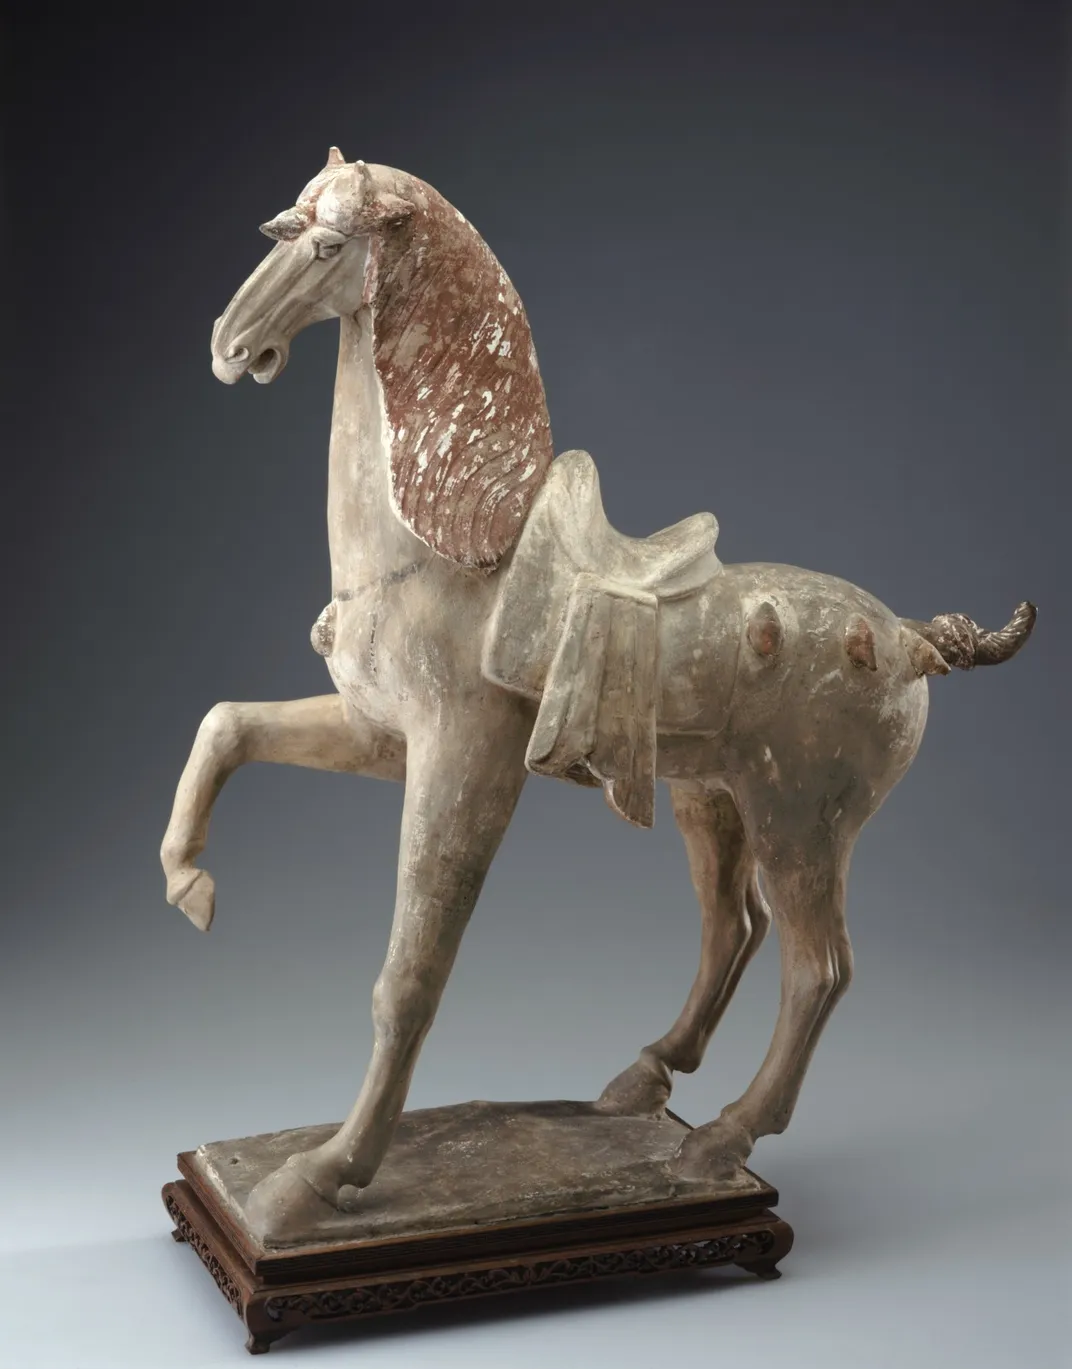 Porcelain statue of a horse hoofing in the air with decorative tassels on his body and one on his forehead.